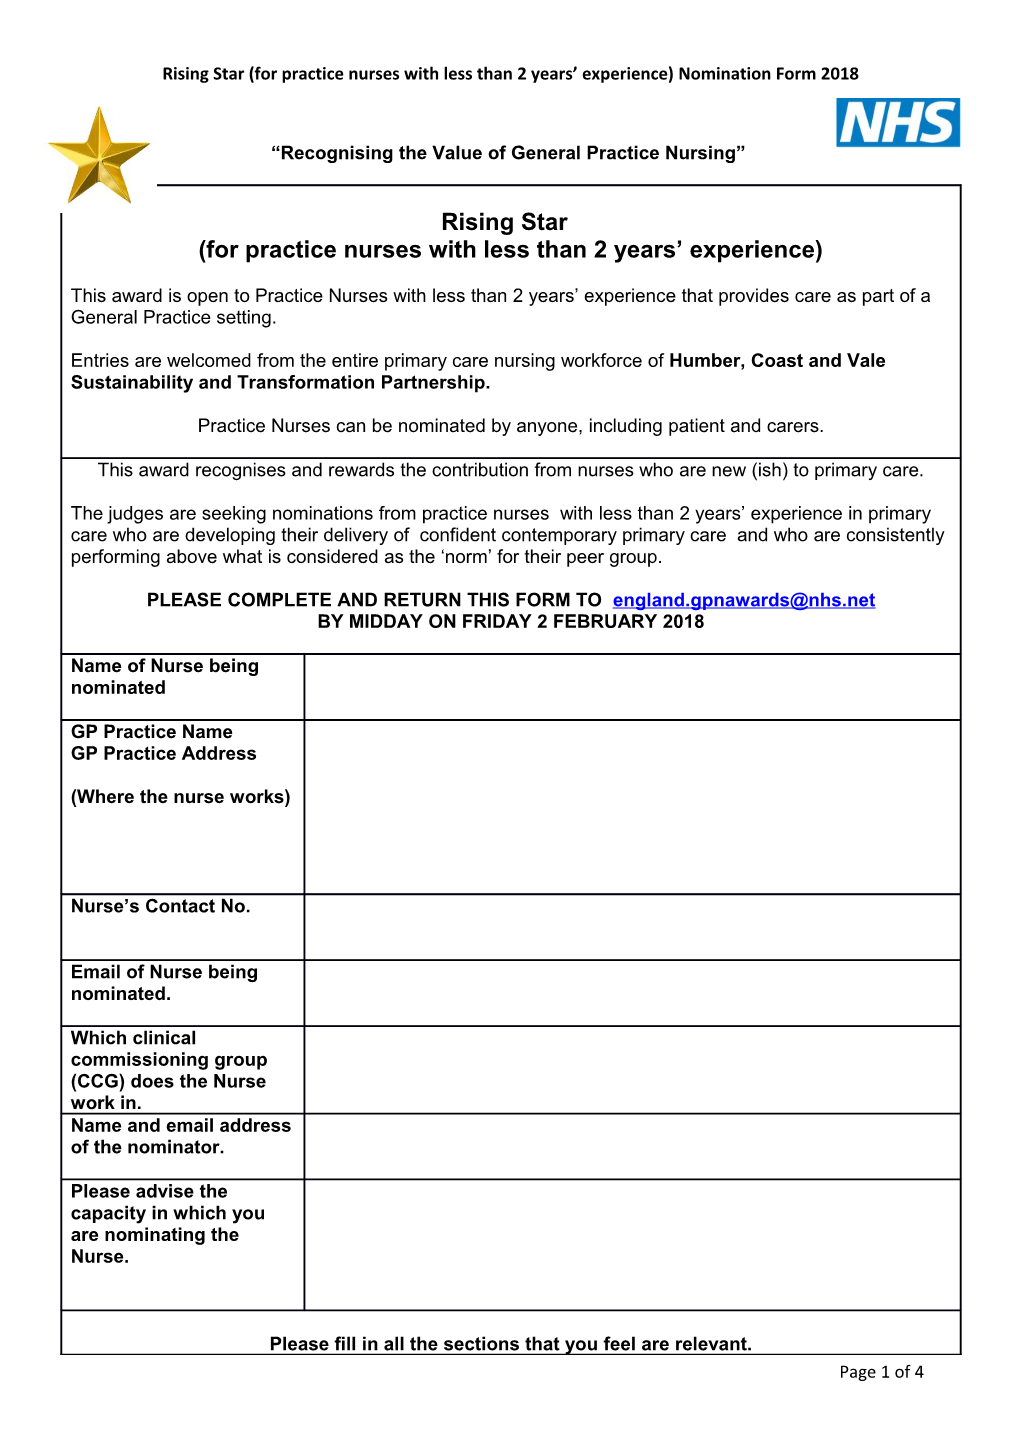 Rising Star (For Practice Nurses with Less Than 2 Years Experience)Nomination Form 2018